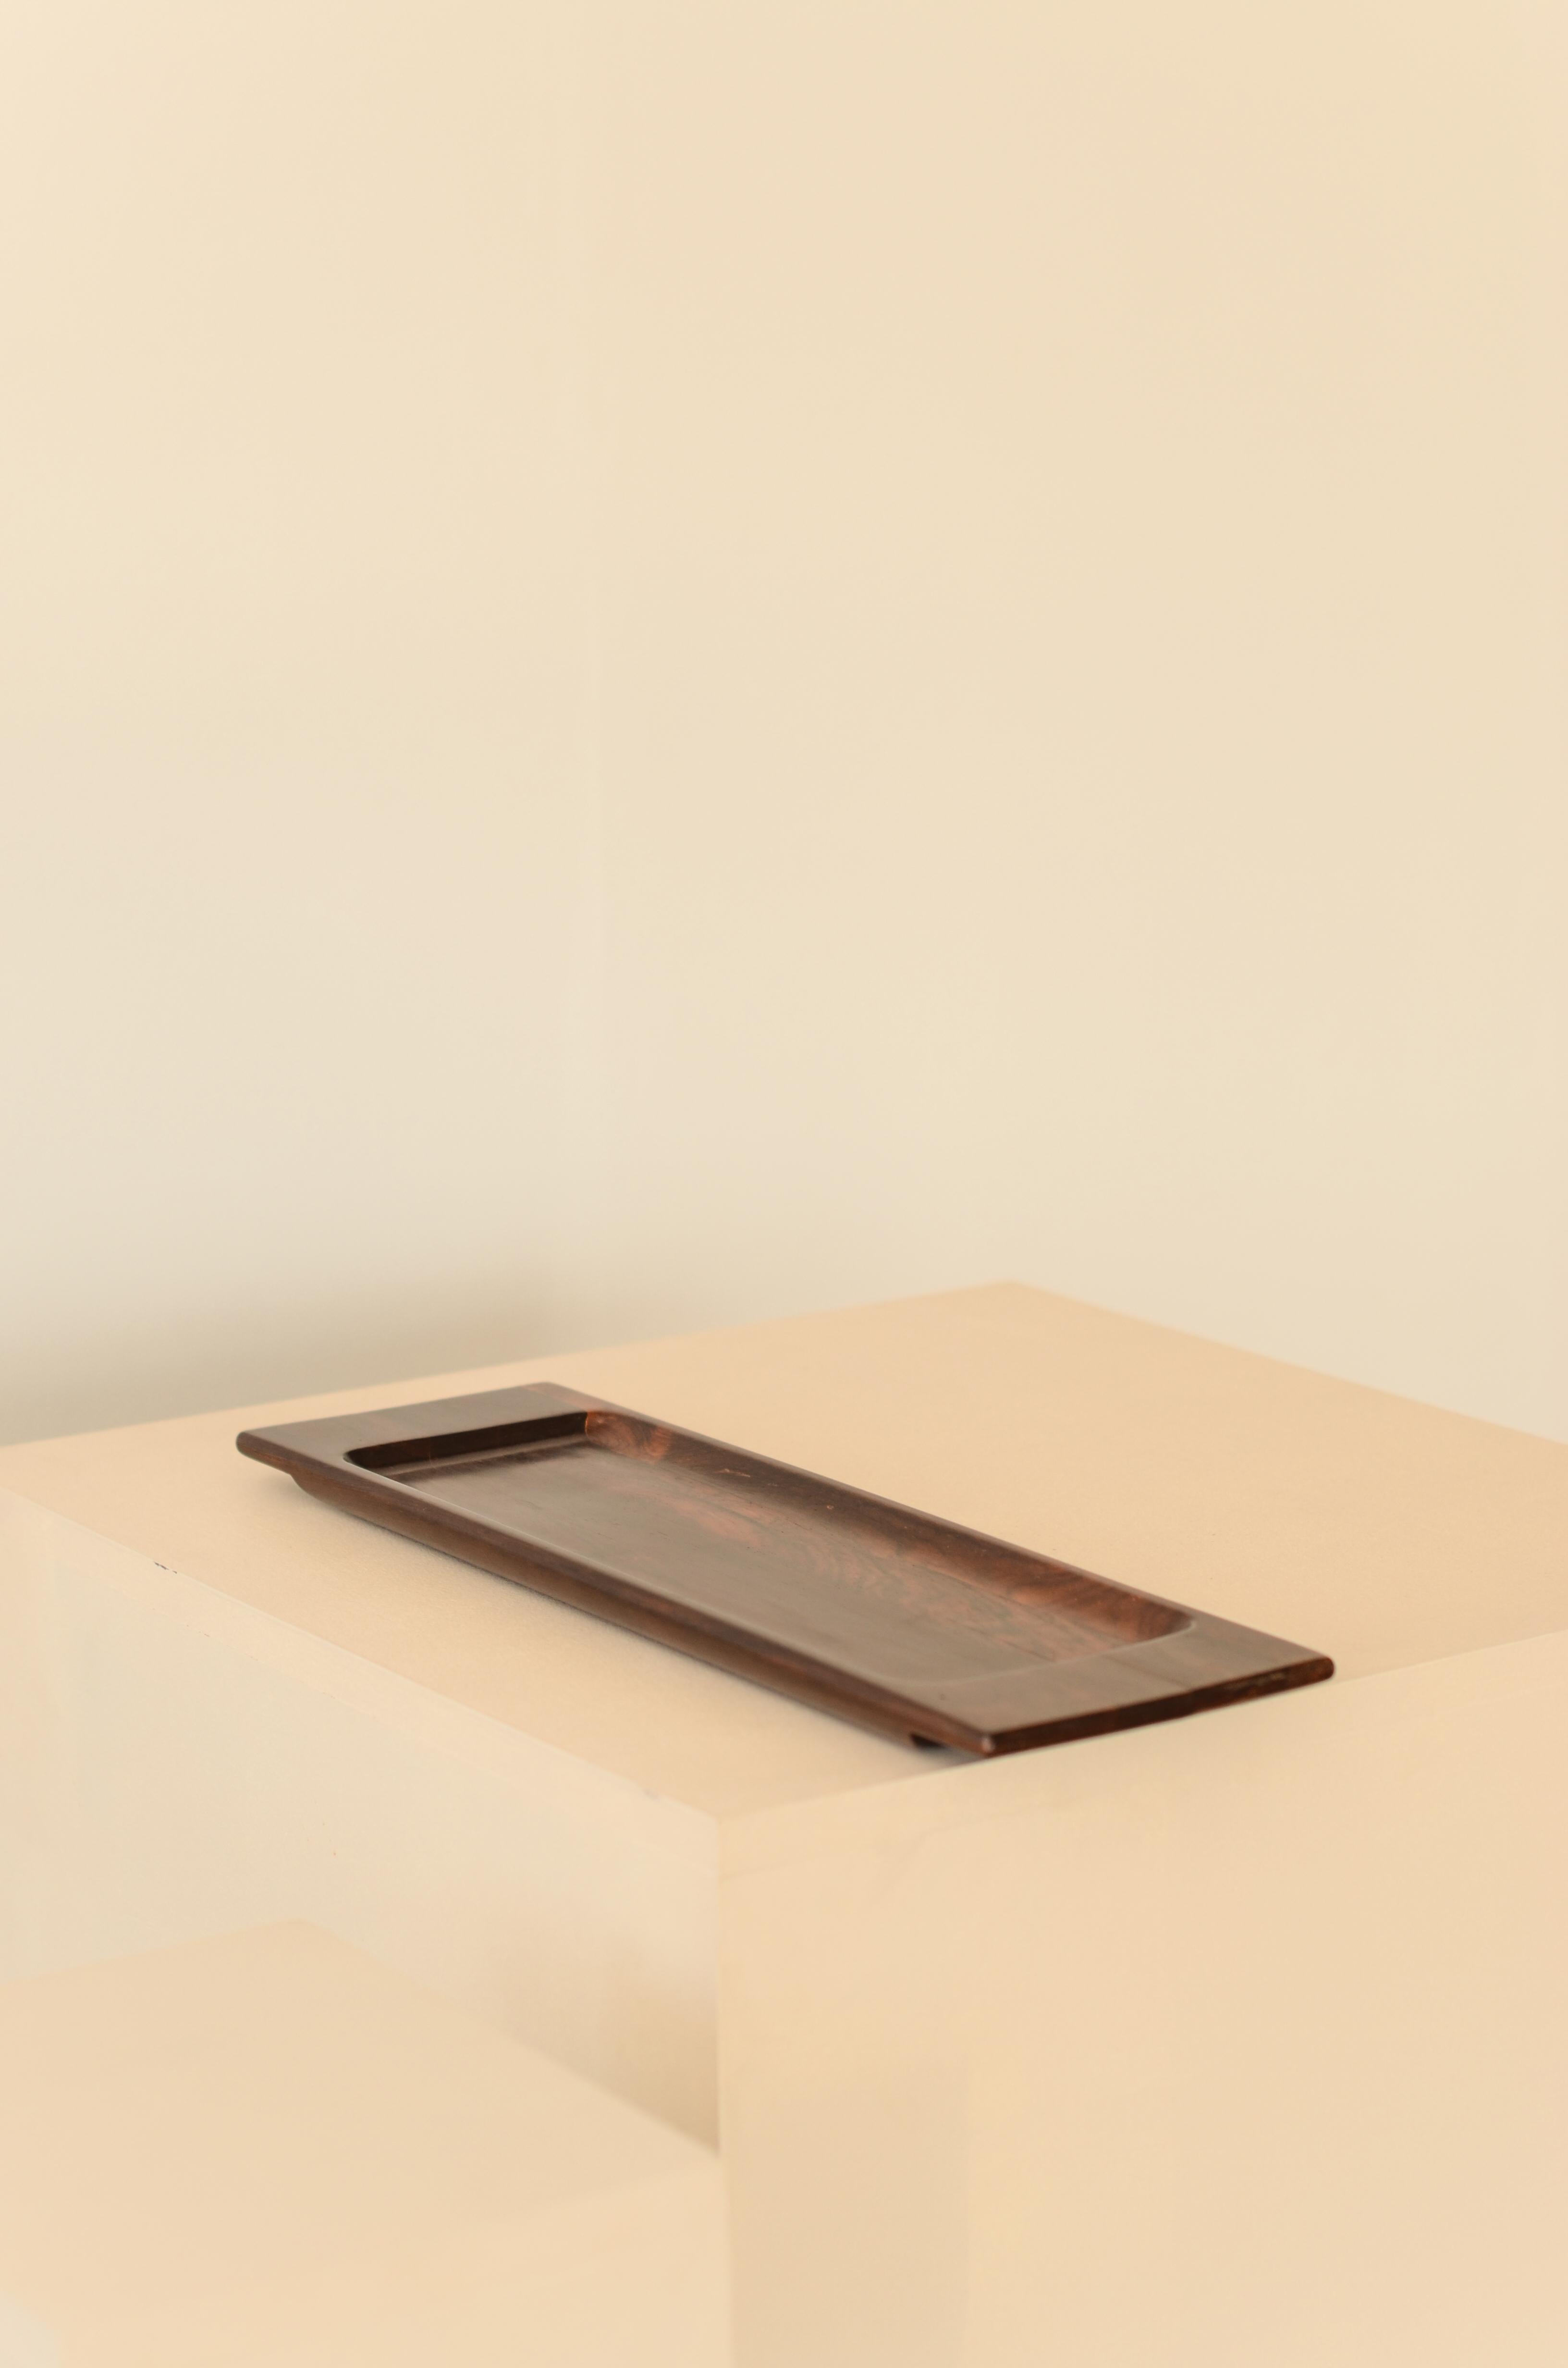 Rare solid rosewood tray by Jean Gillon model 701 from the WoodArt catalogue.

Jean Gillon (1919-2007) was born in Romania, where he graduated in Architecture and Fine Arts. In 1956 he moved to Brazil, where he developed an impressive and vast work